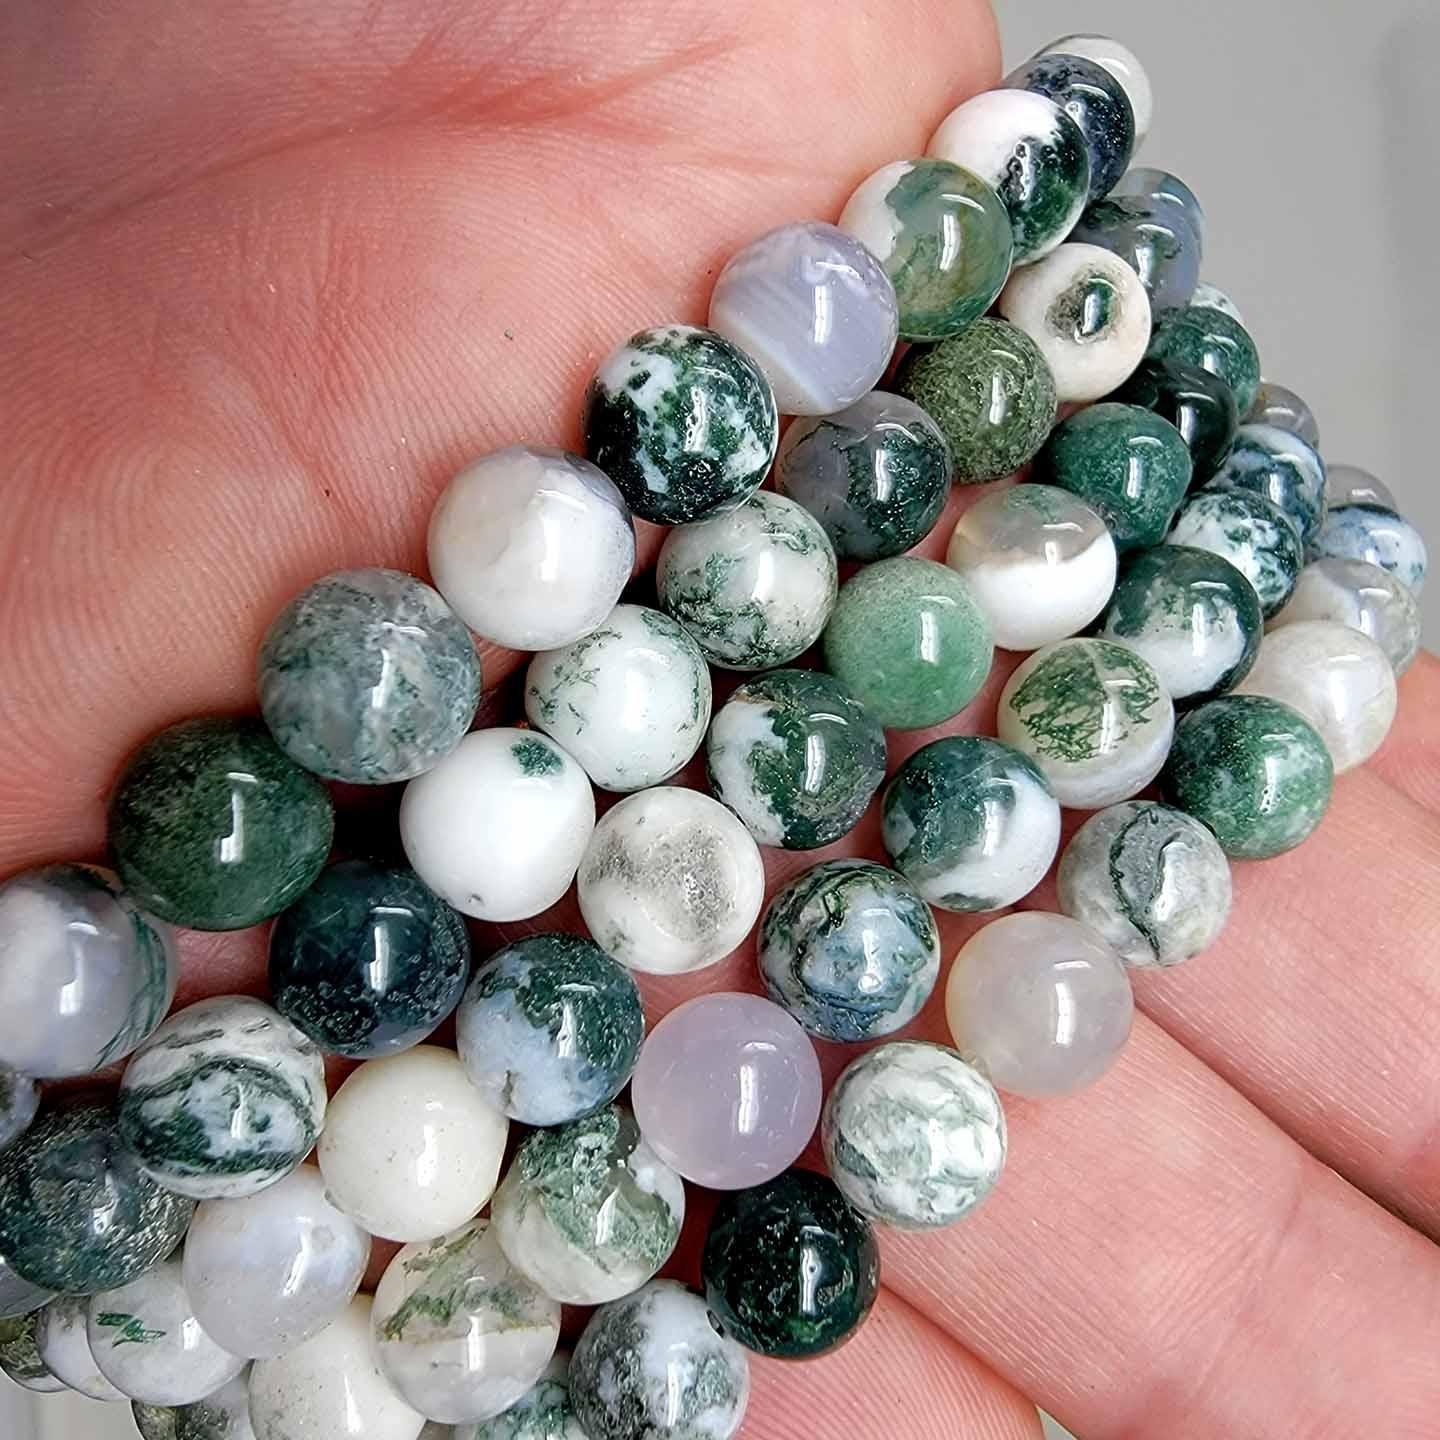 India Tree Moss Agate 8mm Lapidary Bead 15 Inch Strand! - LapidaryCentral